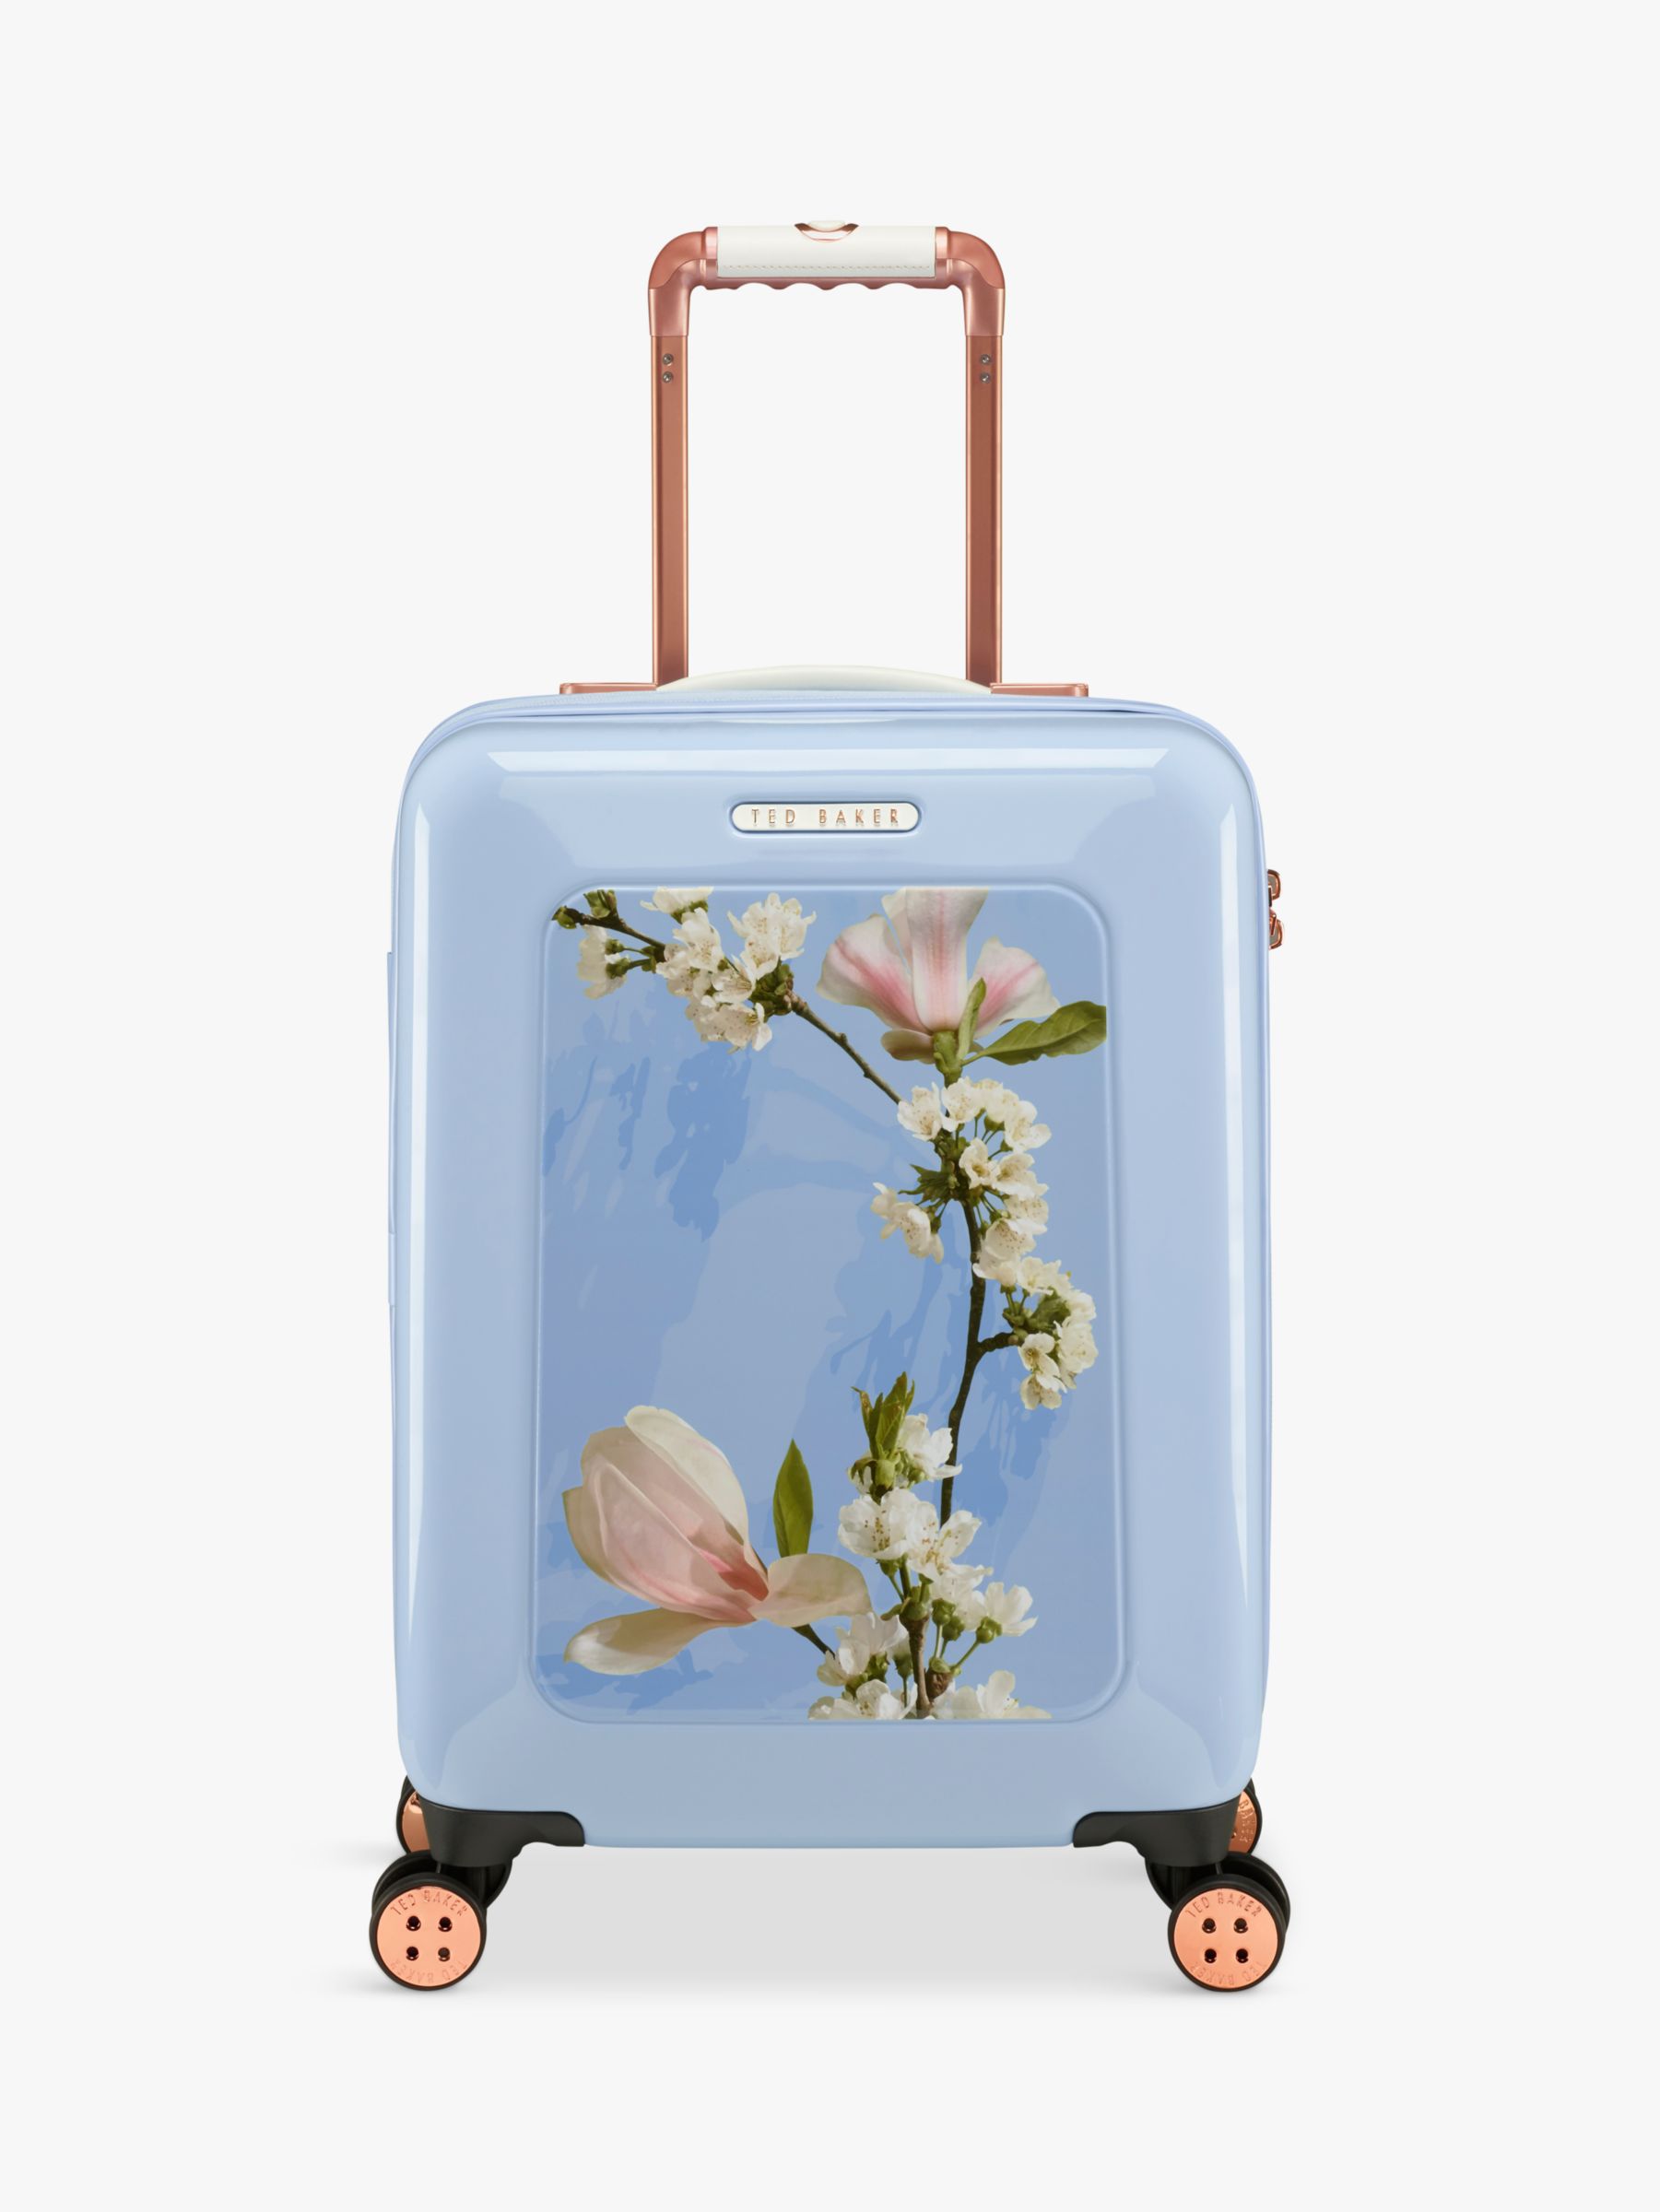 Ted Baker Harmony 4-Wheel 54cm Cabin Suitcase, Blue at John Lewis ...